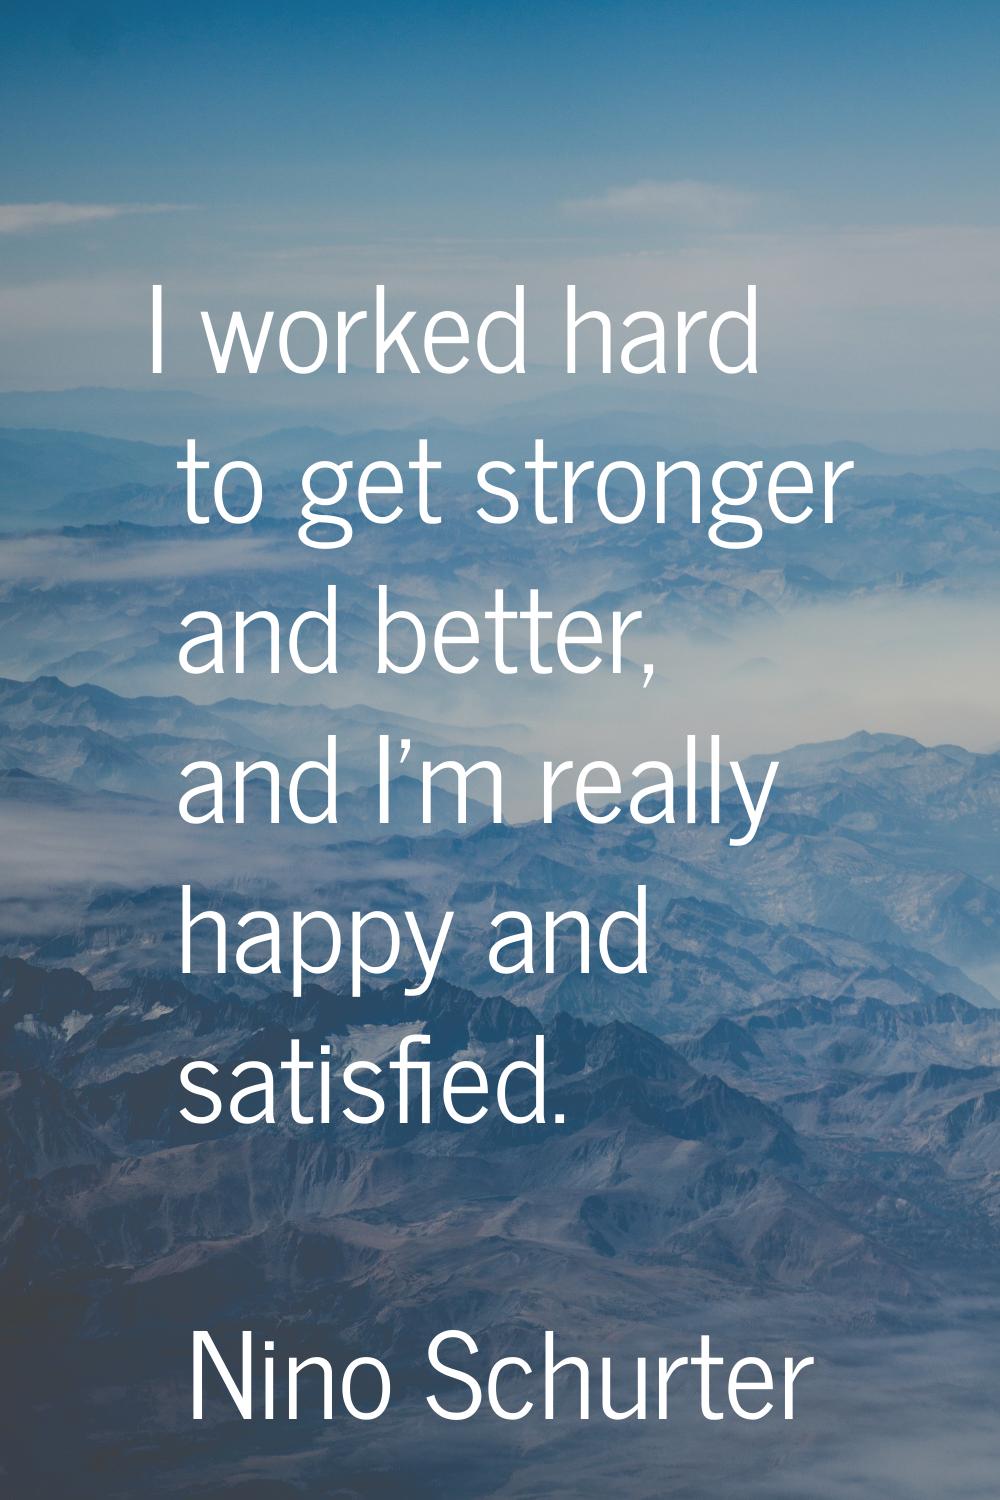 I worked hard to get stronger and better, and I'm really happy and satisfied.